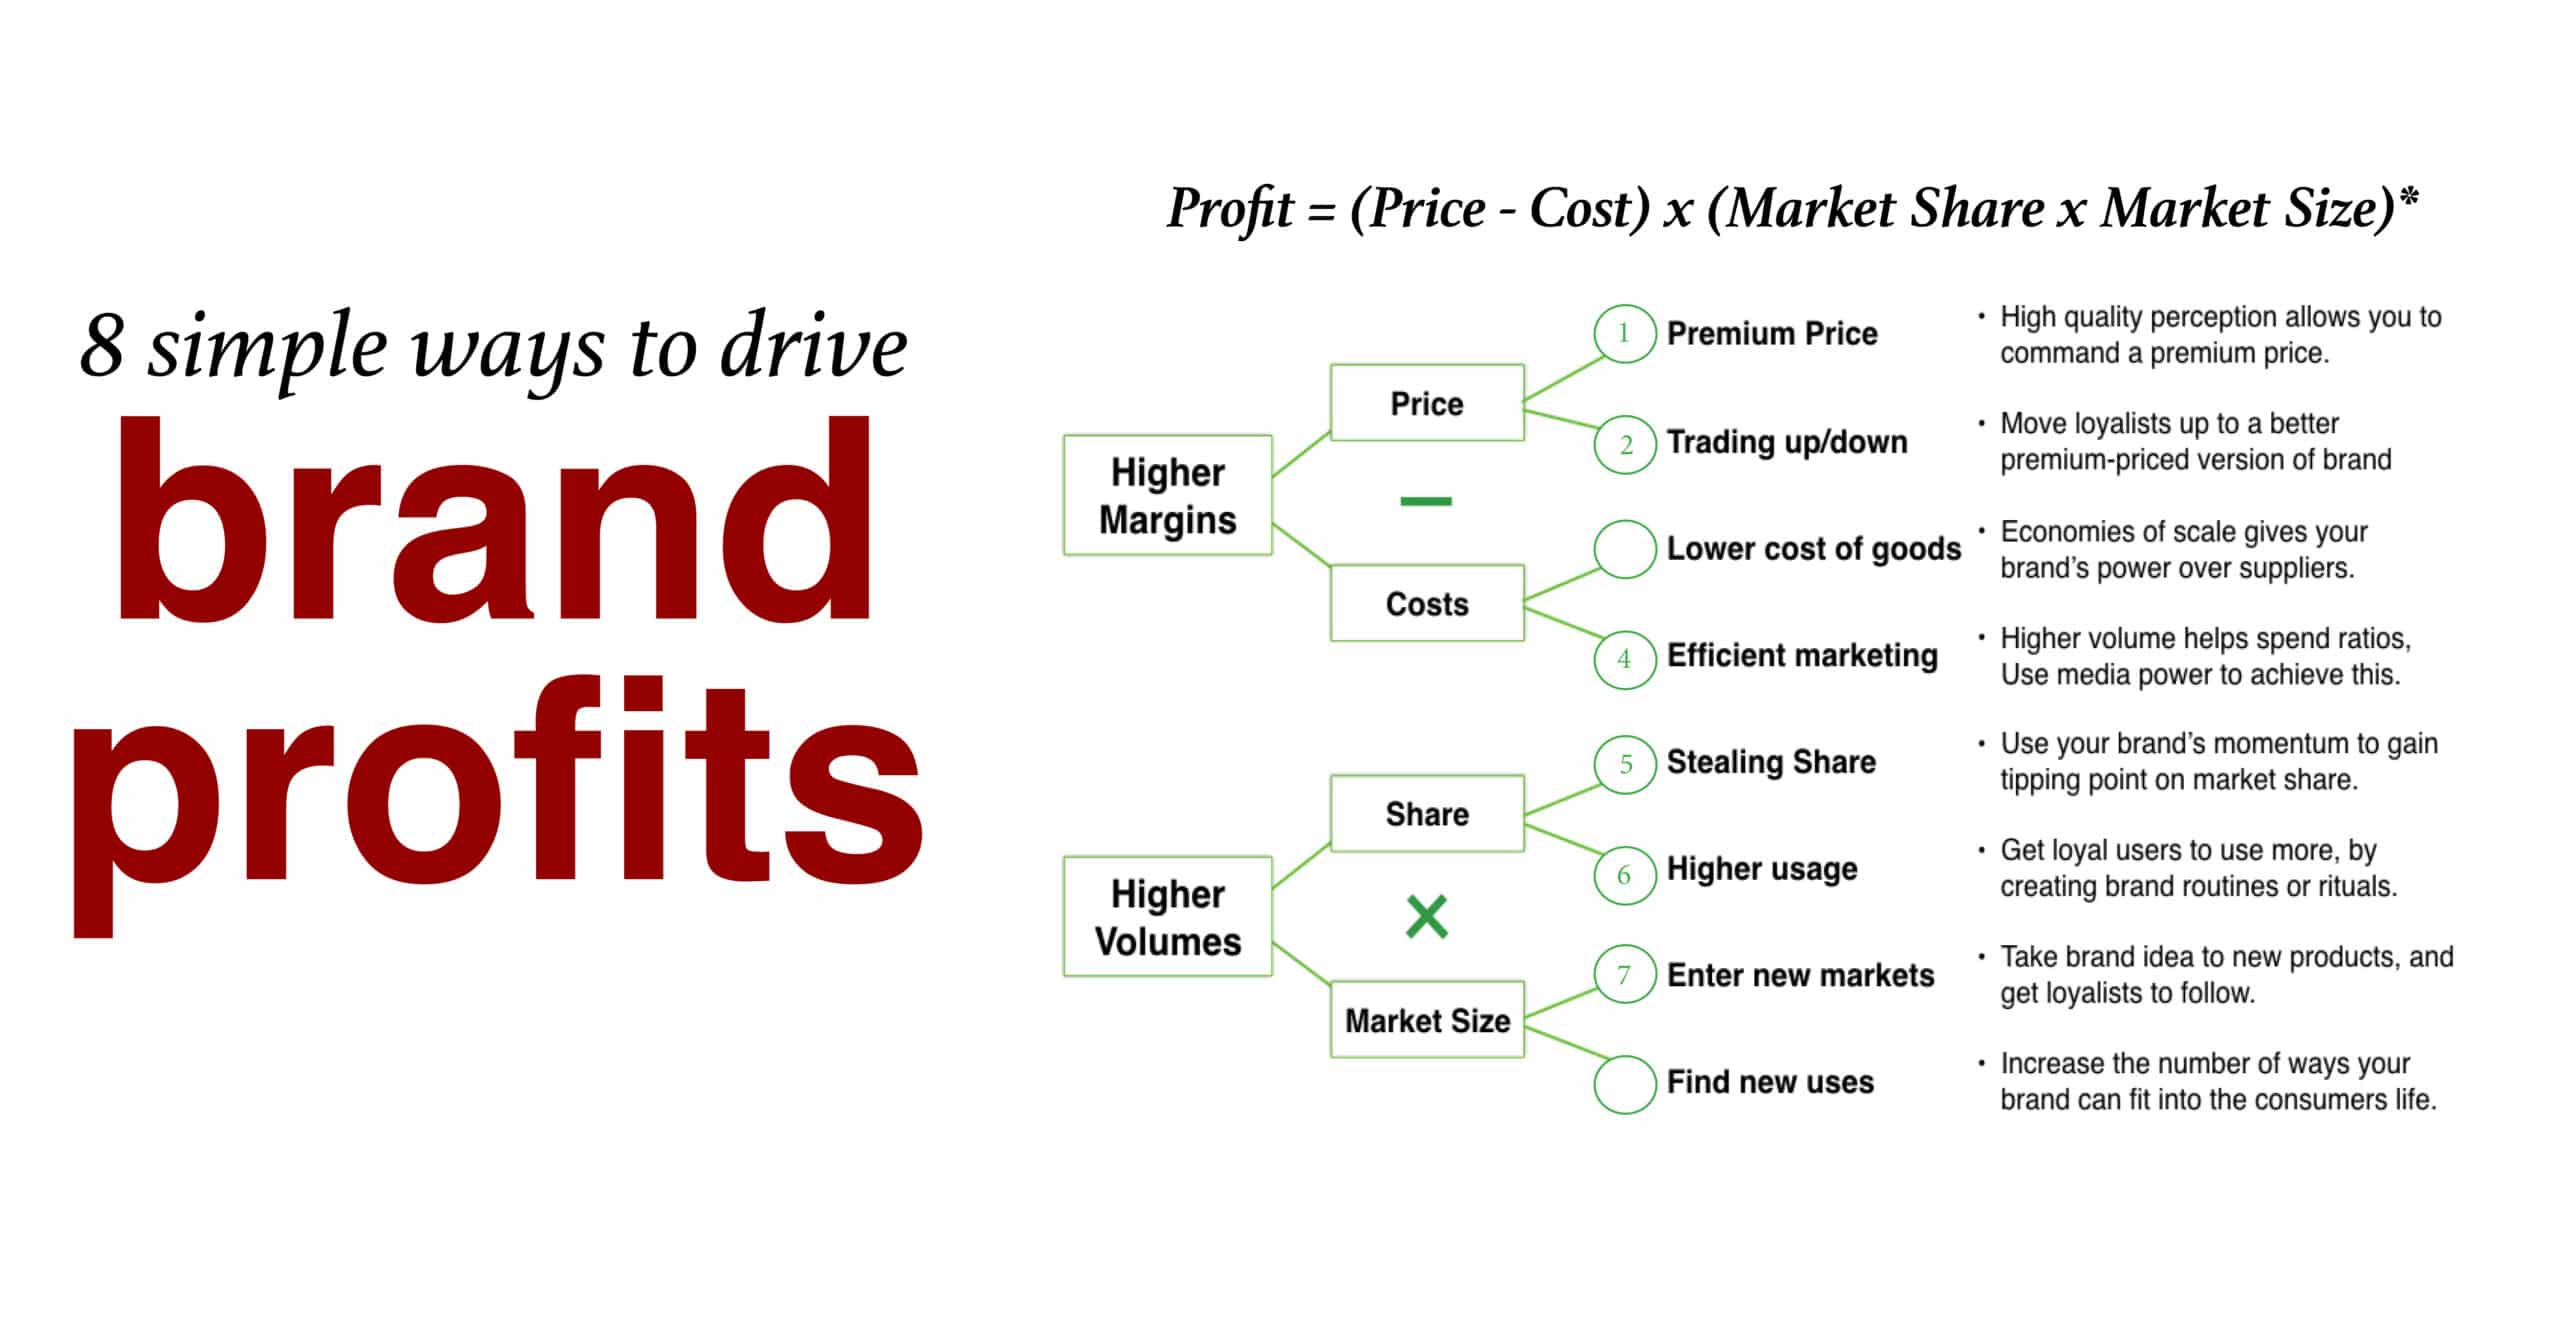 8 simple ways to drive brand profit marketing finance. Working with marketing data and analytical questions